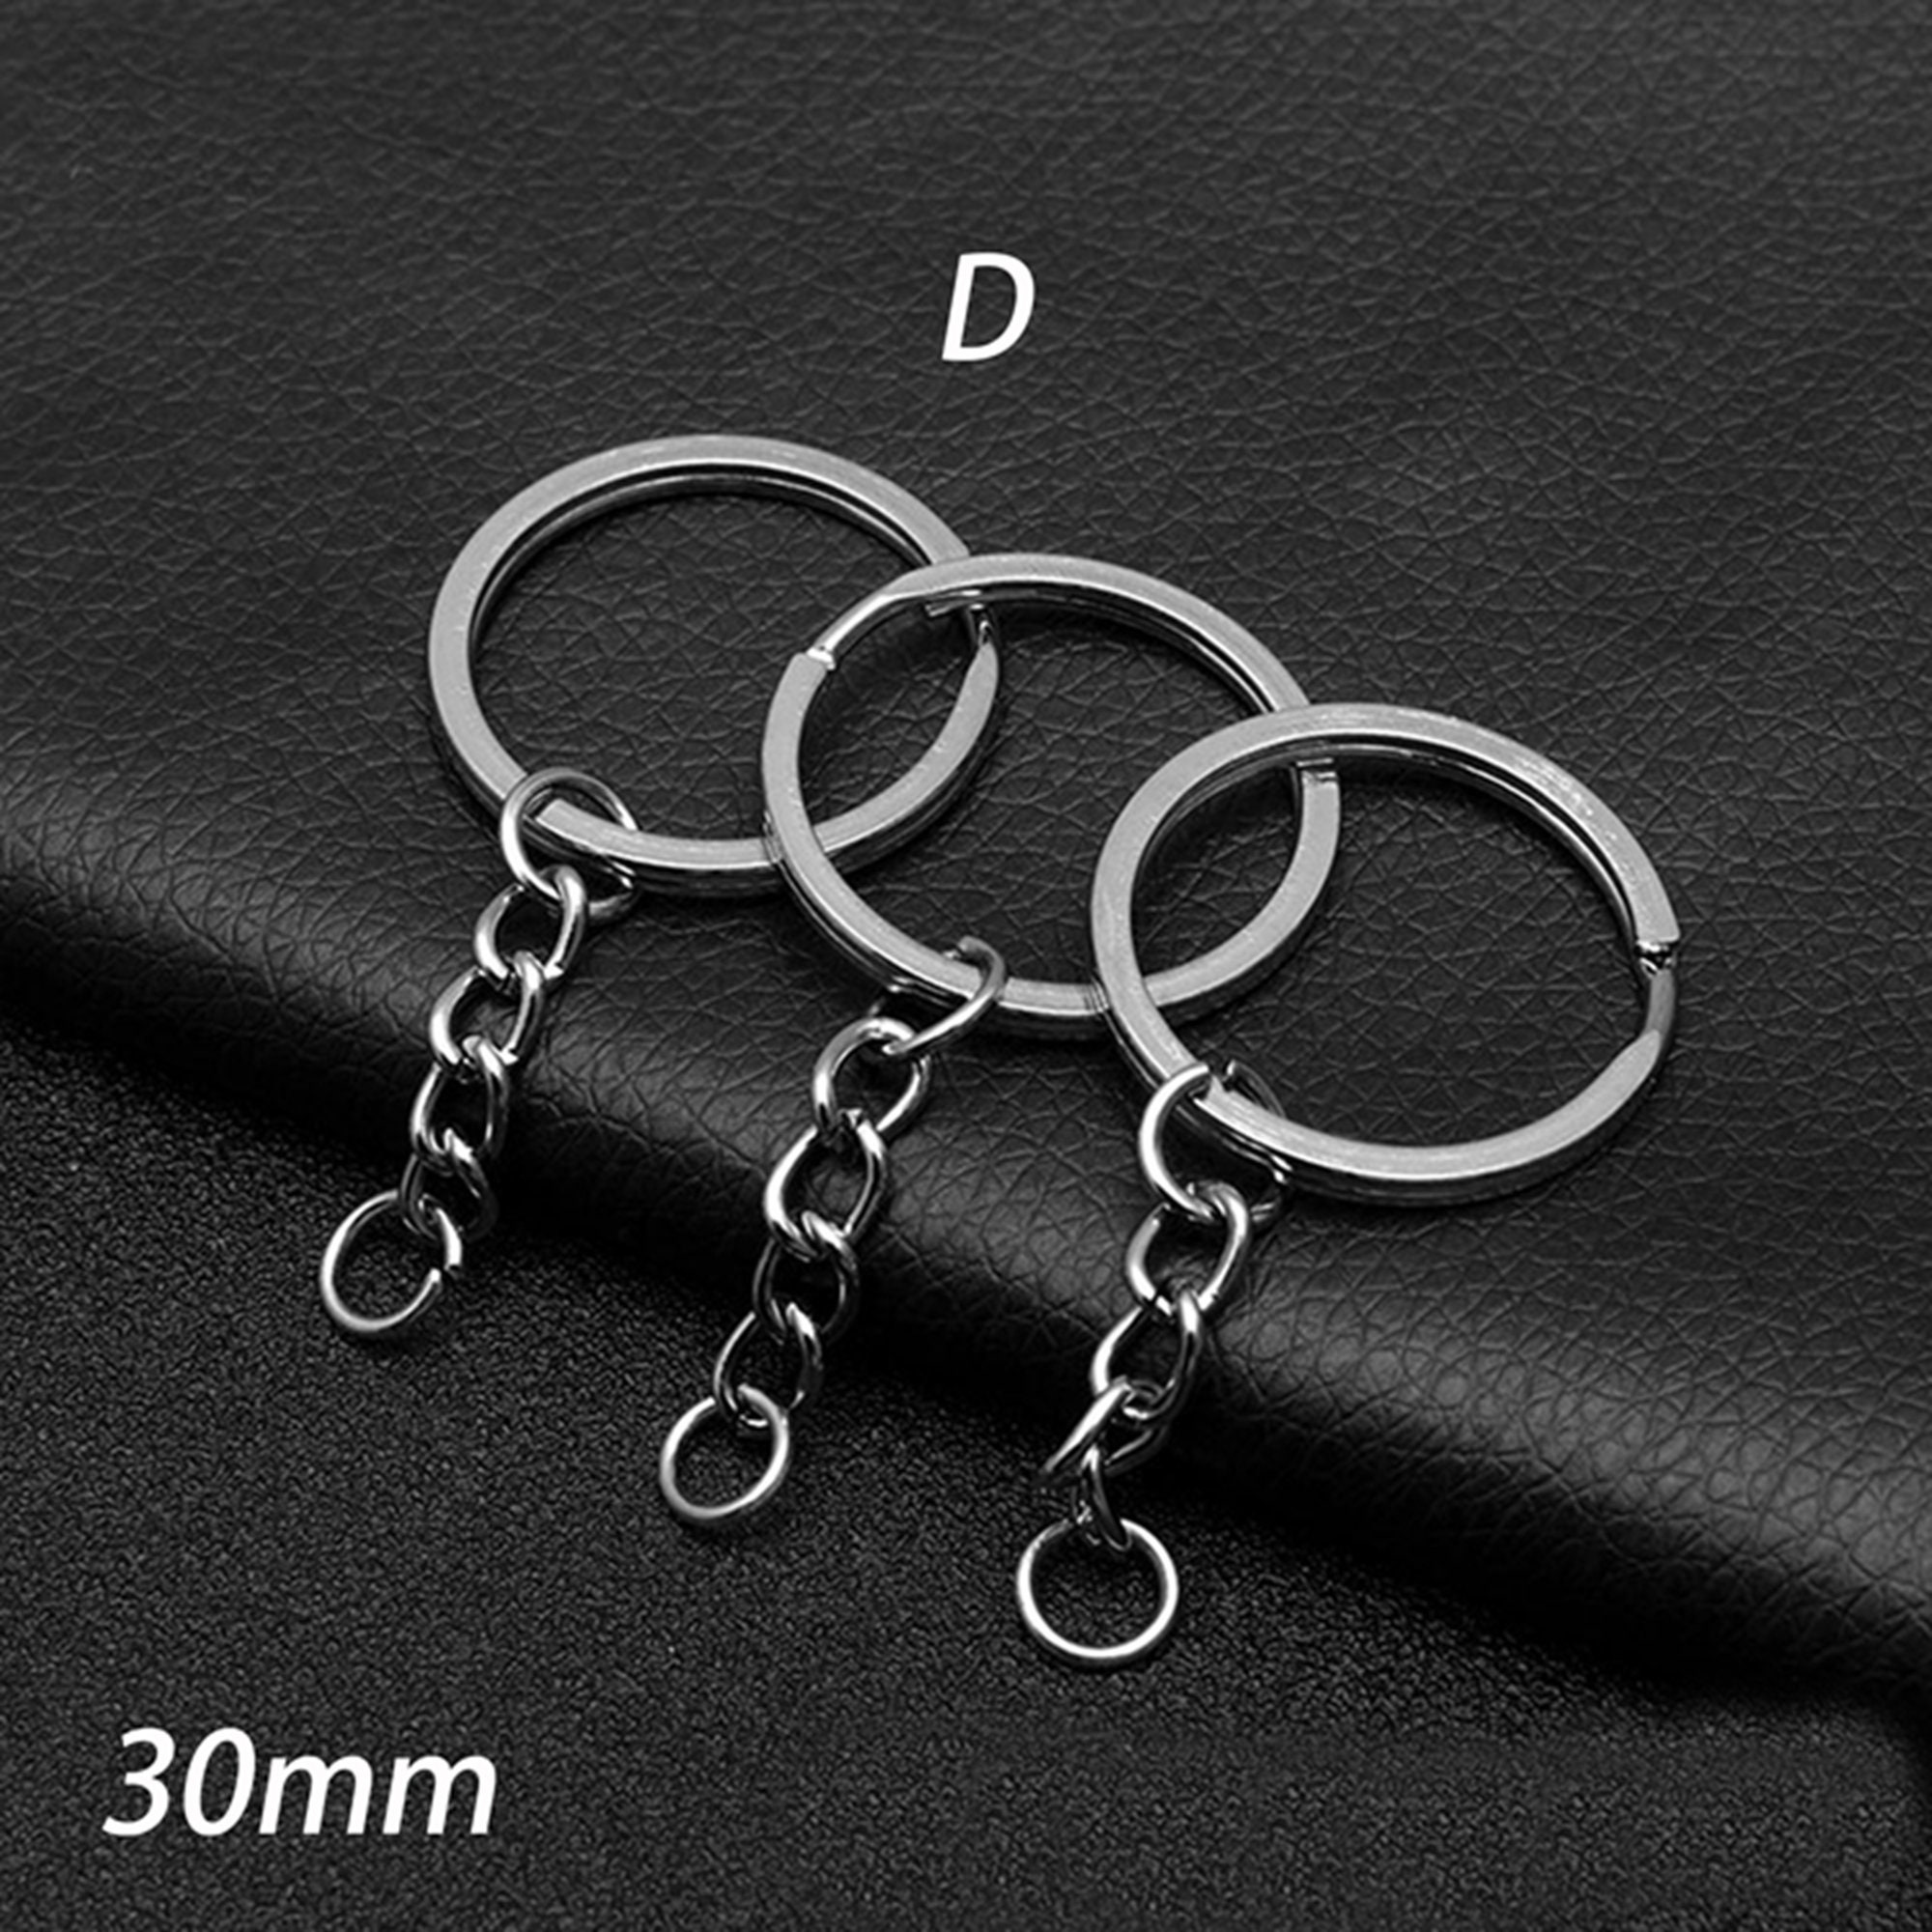 Suuchh 100pcs Keychain Rings with Chain and Jump Rings, 1 inch Split Key Ring with Chain Heavy-Duty Keychain Rings Bulk for Craft Making Jewelry